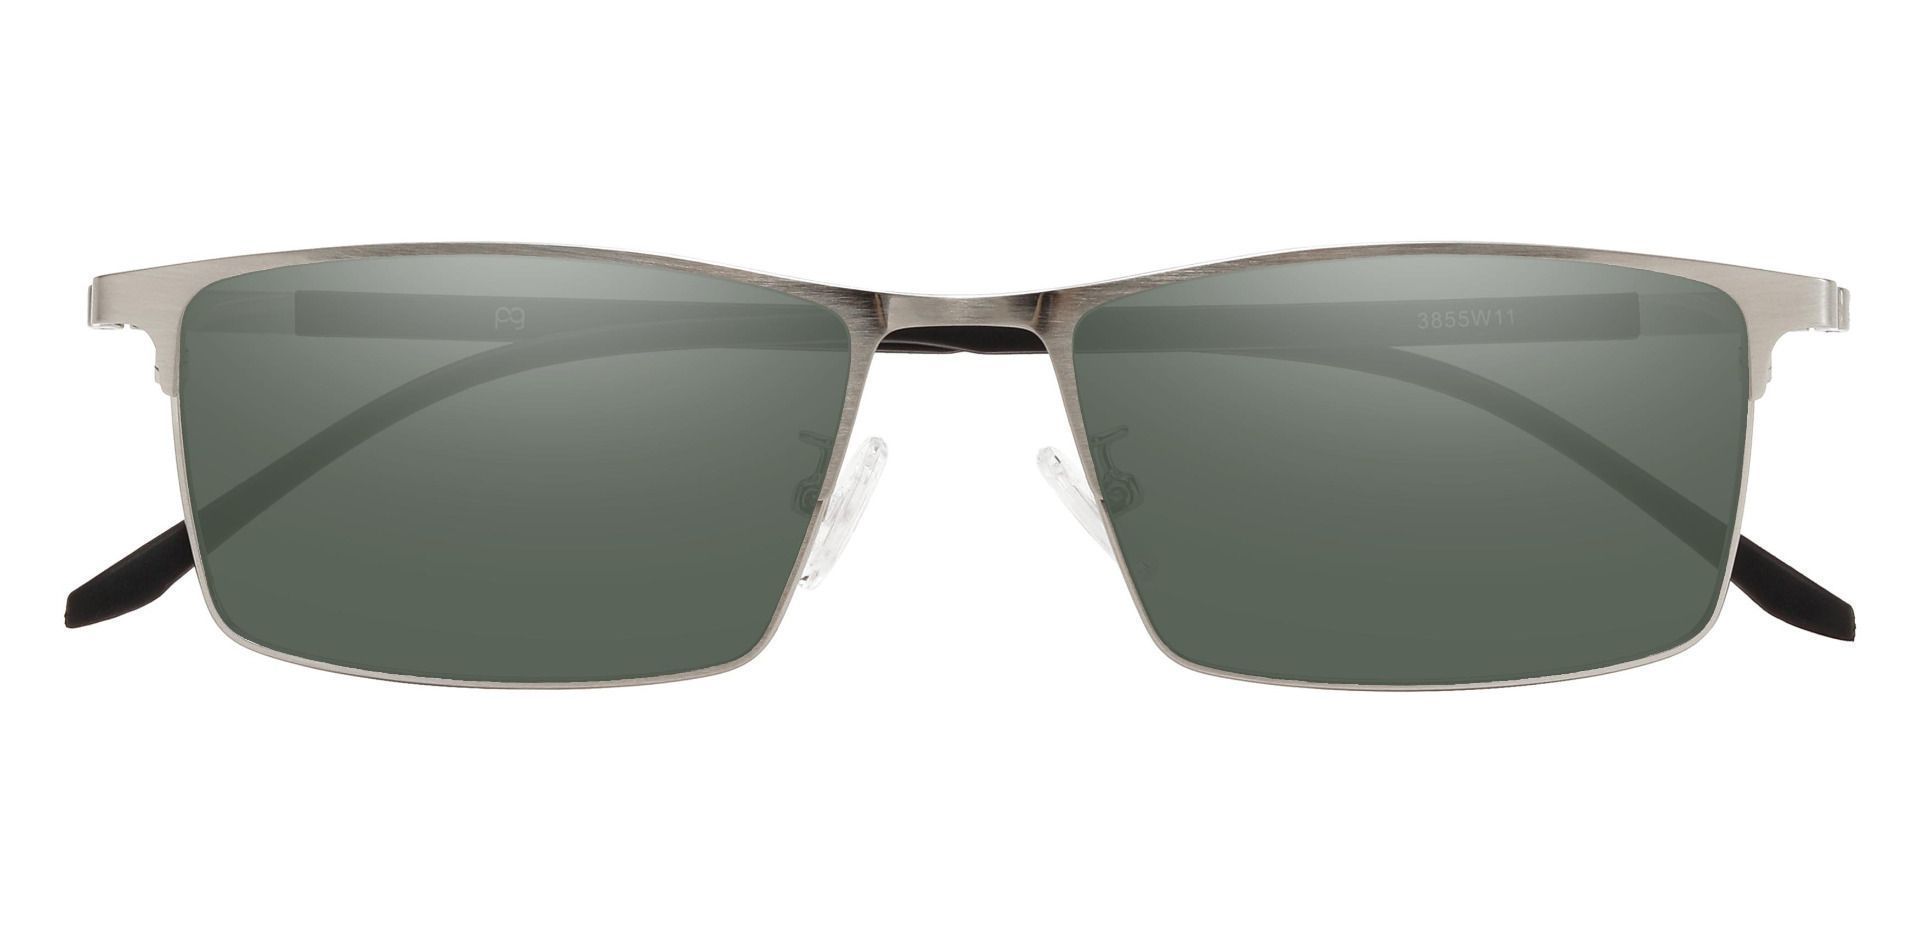 Regis Rectangle Non-Rx Sunglasses - Silver Frame With Green Lenses